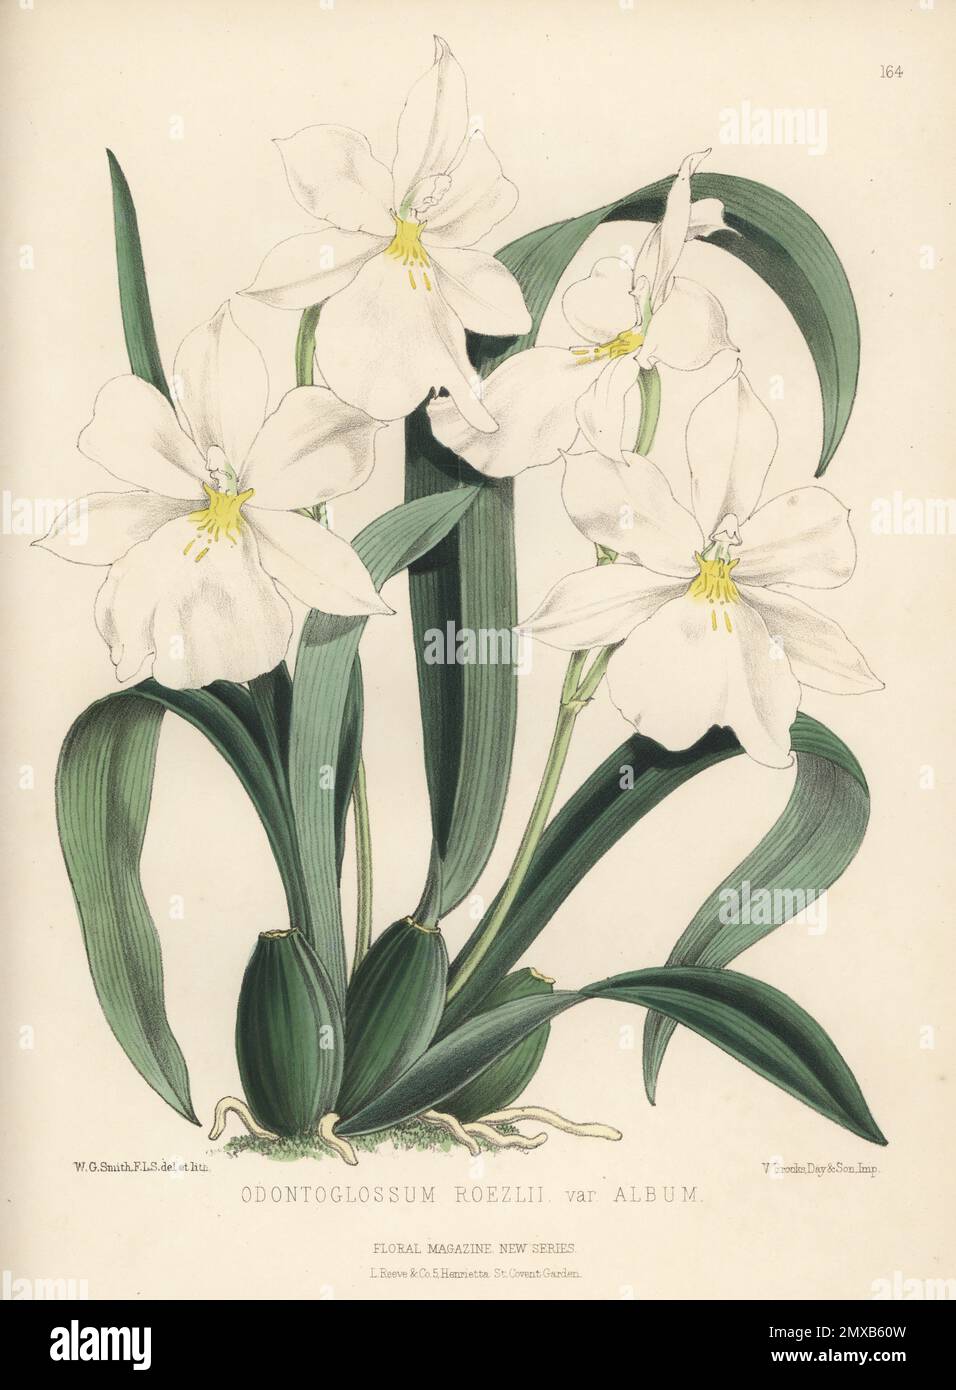 White Miltoniopsis orchid, Miltoniopsis roezlii, native to Colombia, Ecuador, Peru and Panama. Named for orchid collector Benedikt Roezl, imported by William Bull of Chelsea. As Odontoglossum roezlii var. album. Handcolored botanical illustration drawn and lithographed by Worthington George Smith from Henry Honywood Dombrain's Floral Magazine, New Series, Volume 3, L. Reeve, London, 1874. Lithograph printed by Vincent Brooks, Day & Son. Stock Photo